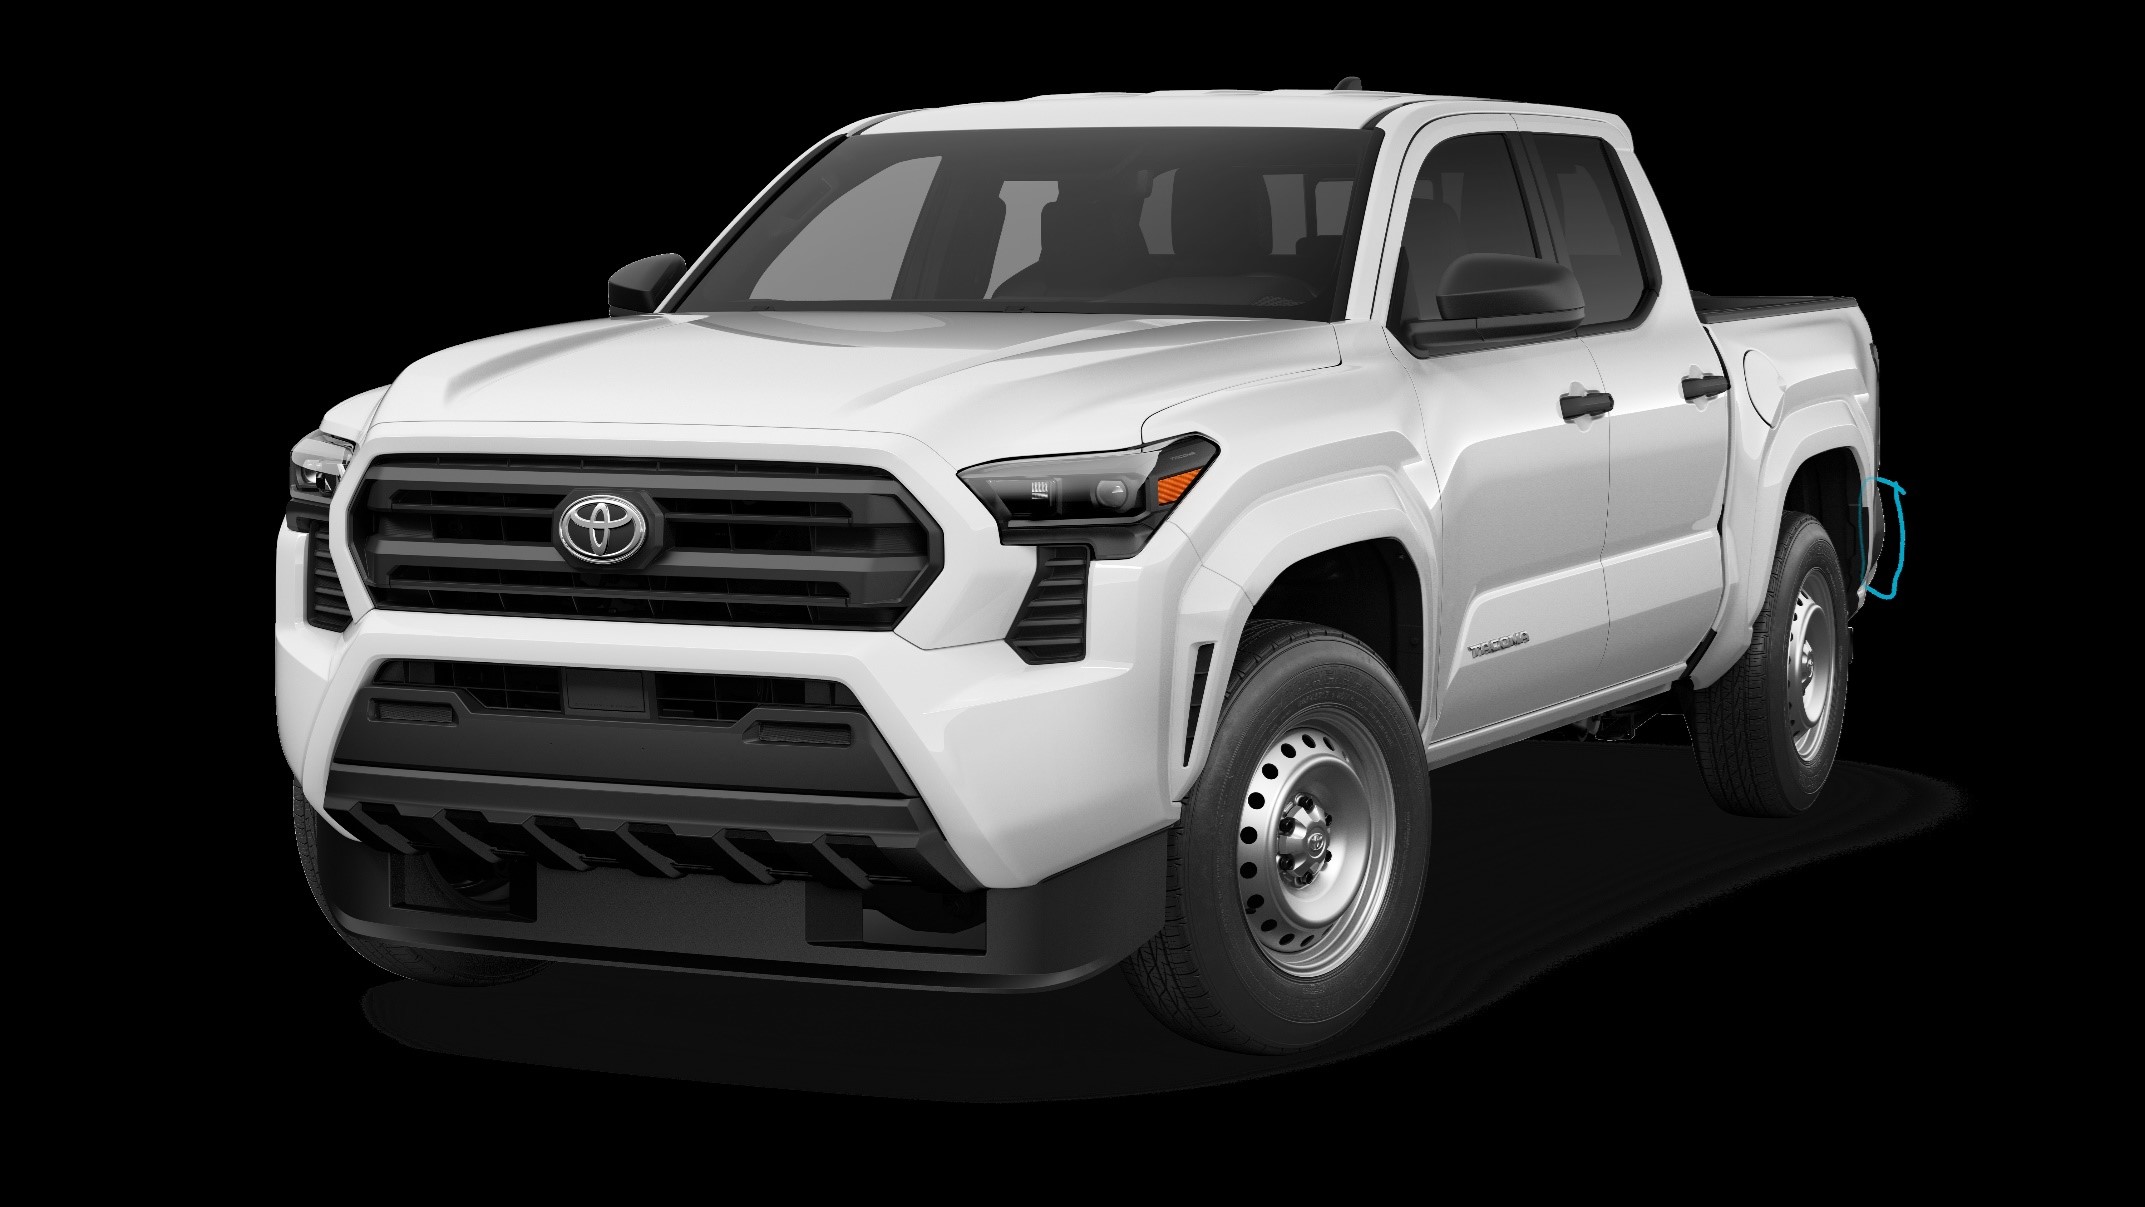 2024 Tacoma 2024 Tacoma TRD OFF ROAD (in Solar Octane) Model Trim First Look! Picture2